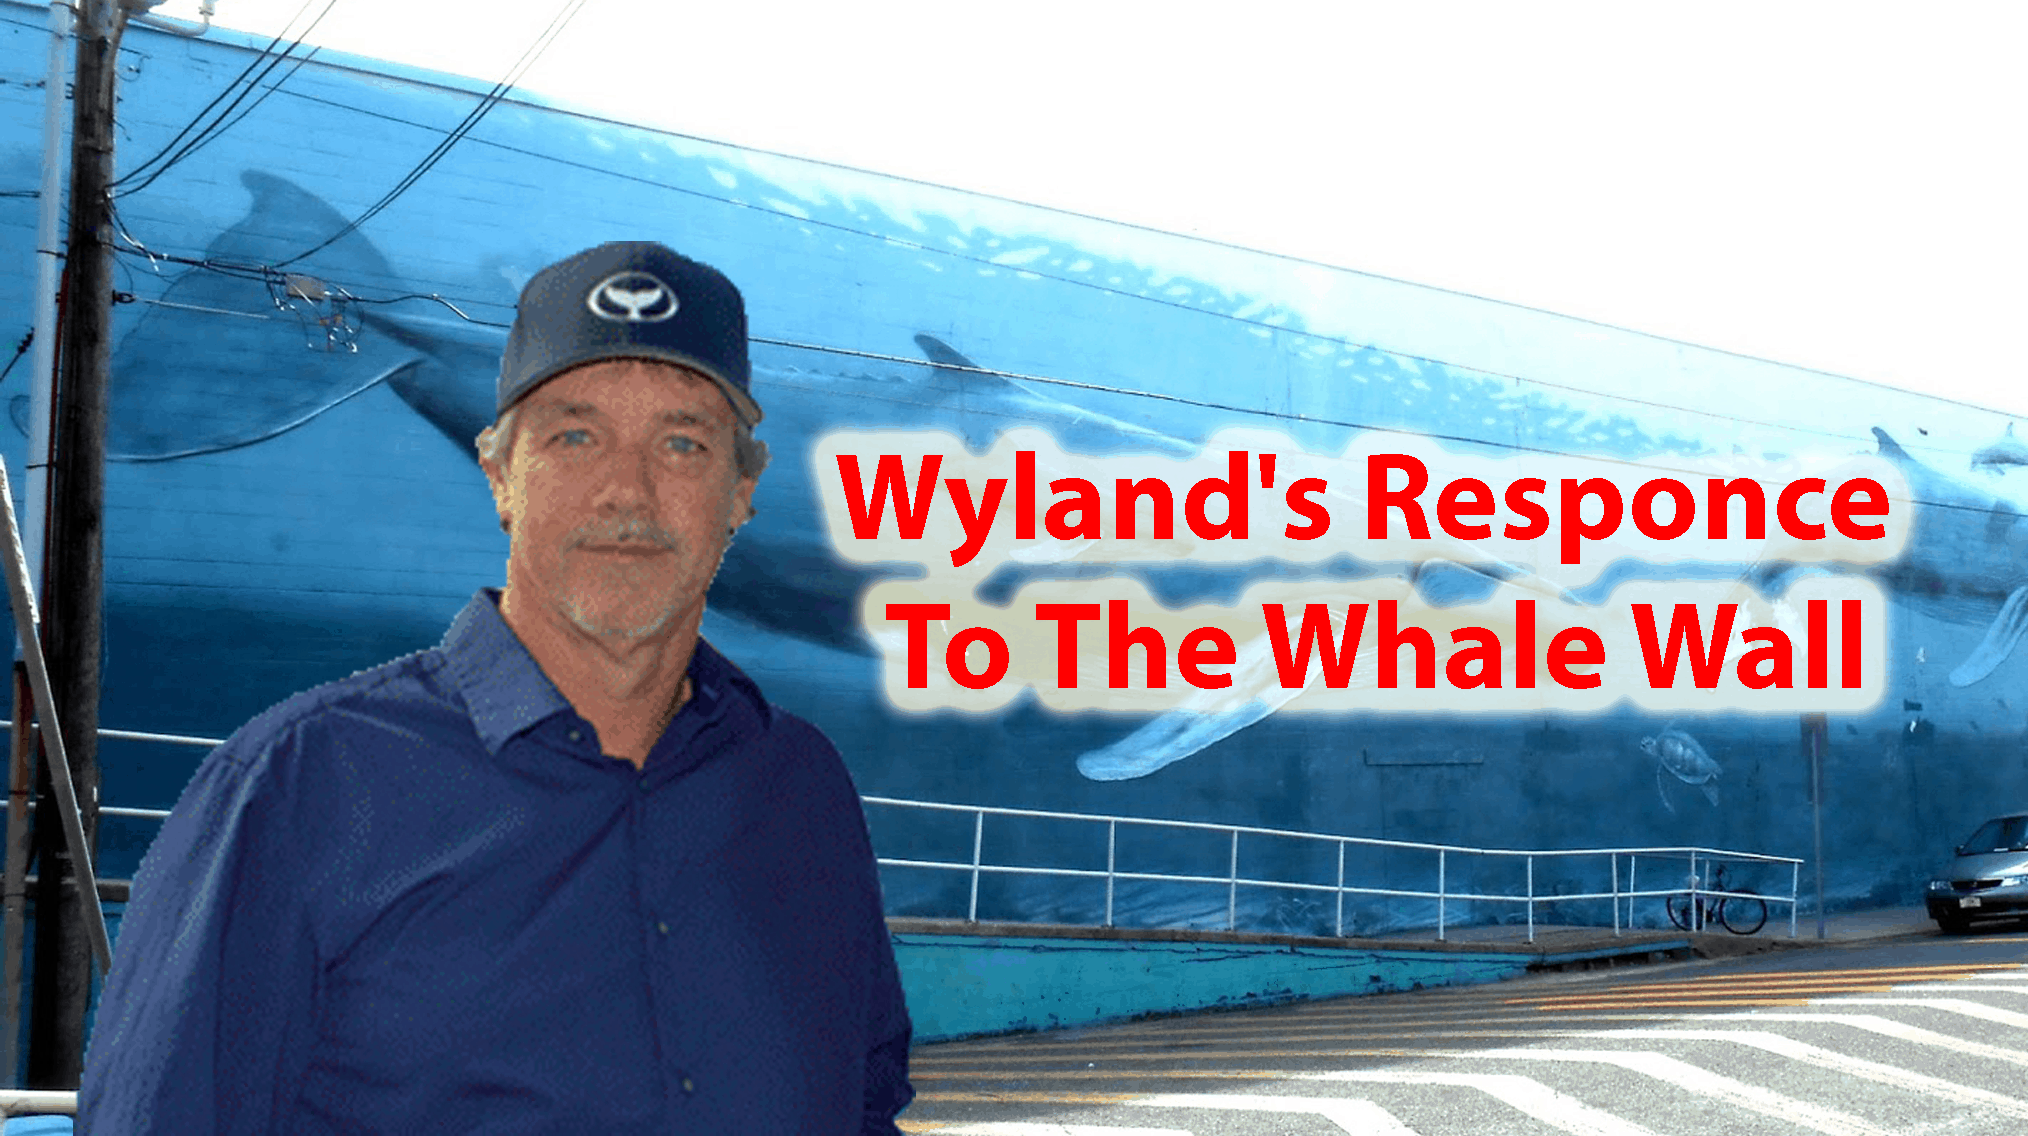 Wyland's Responce To The Whale Wall